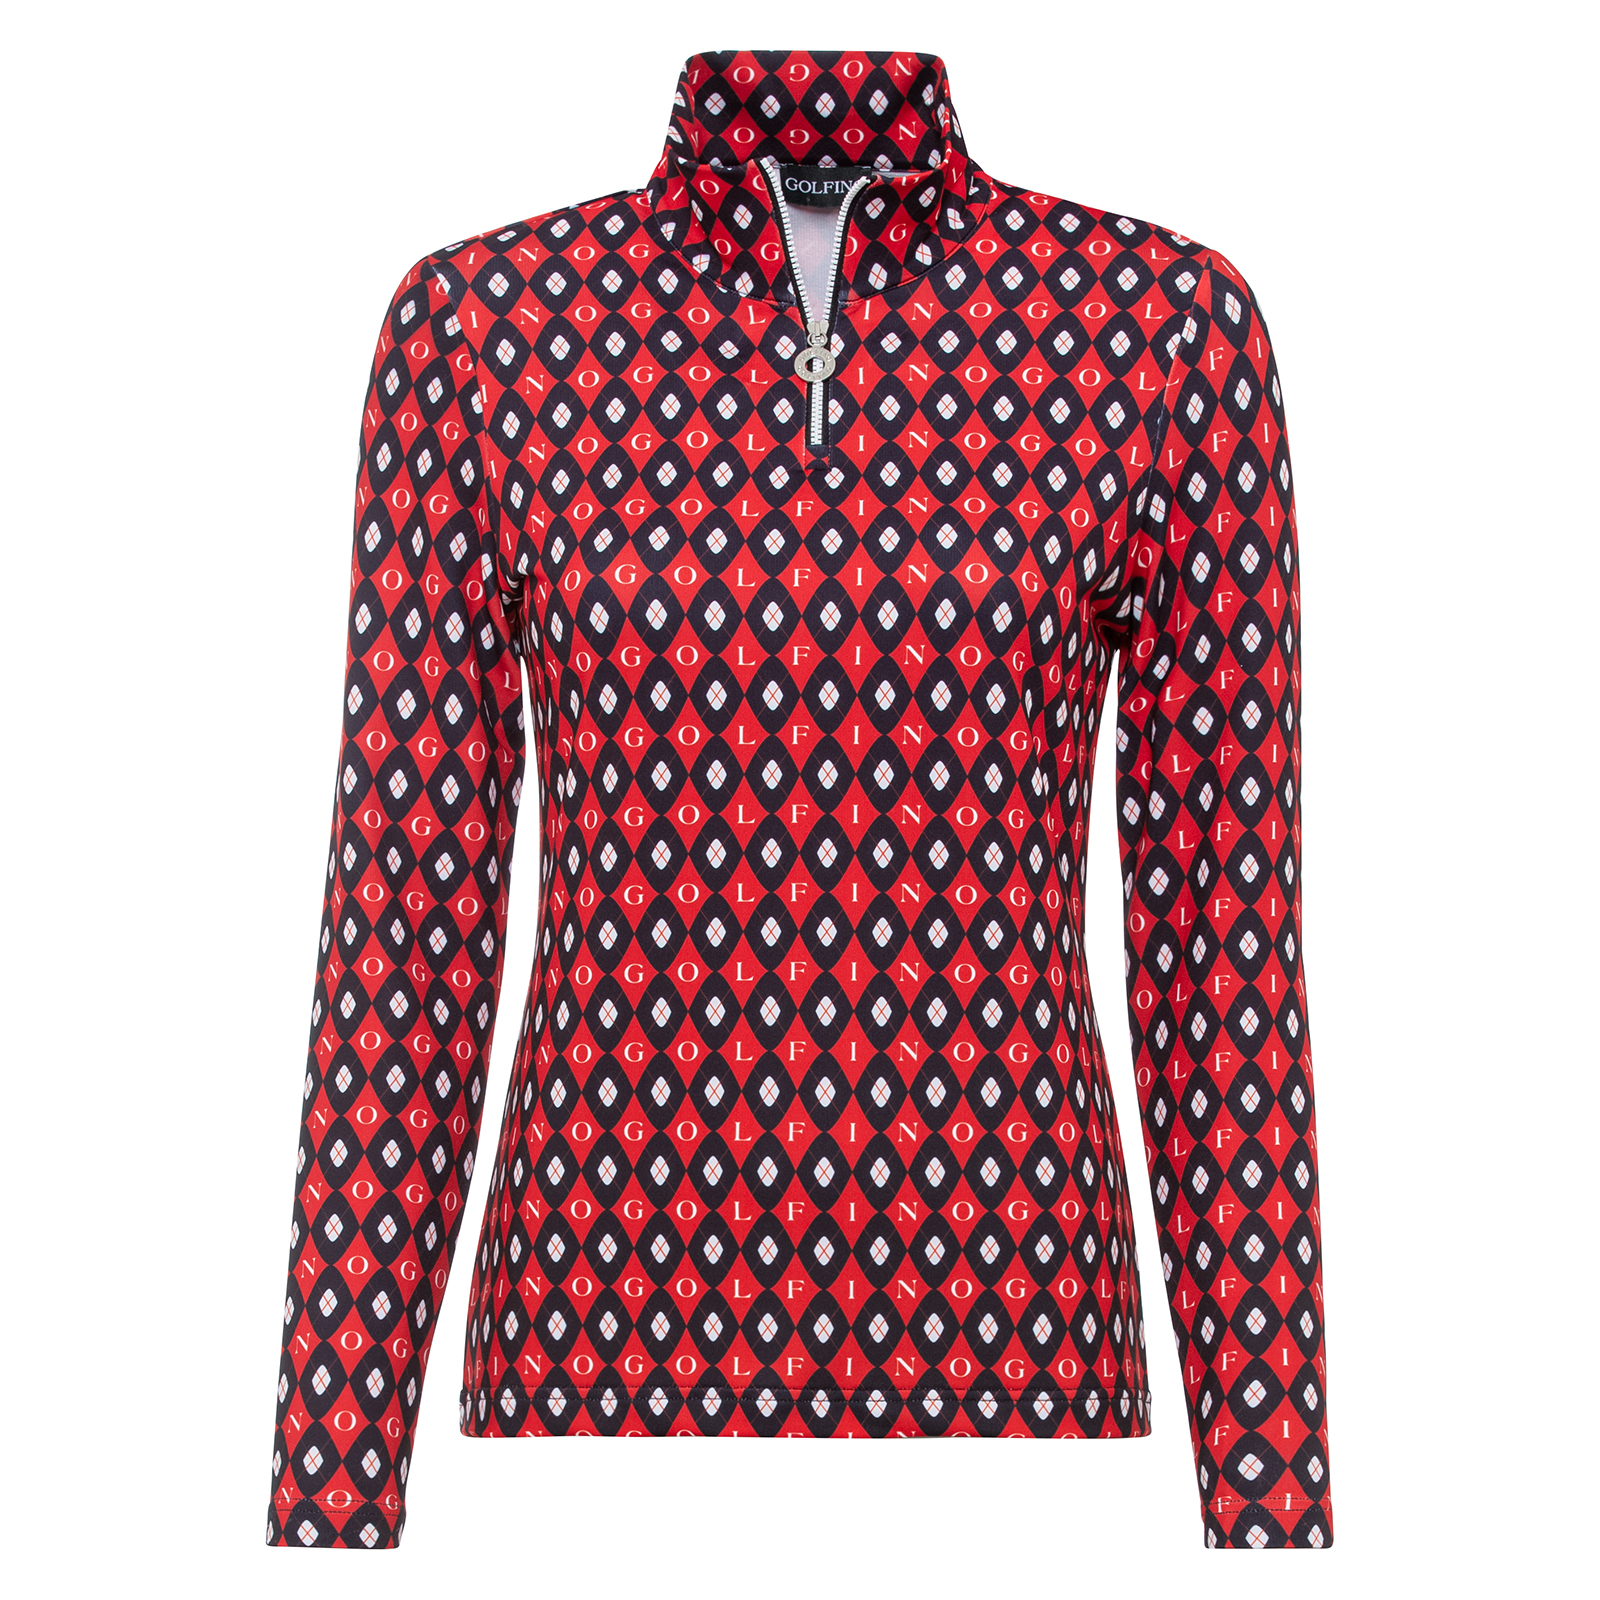 Ladies’ signature top with all-over argyle pattern